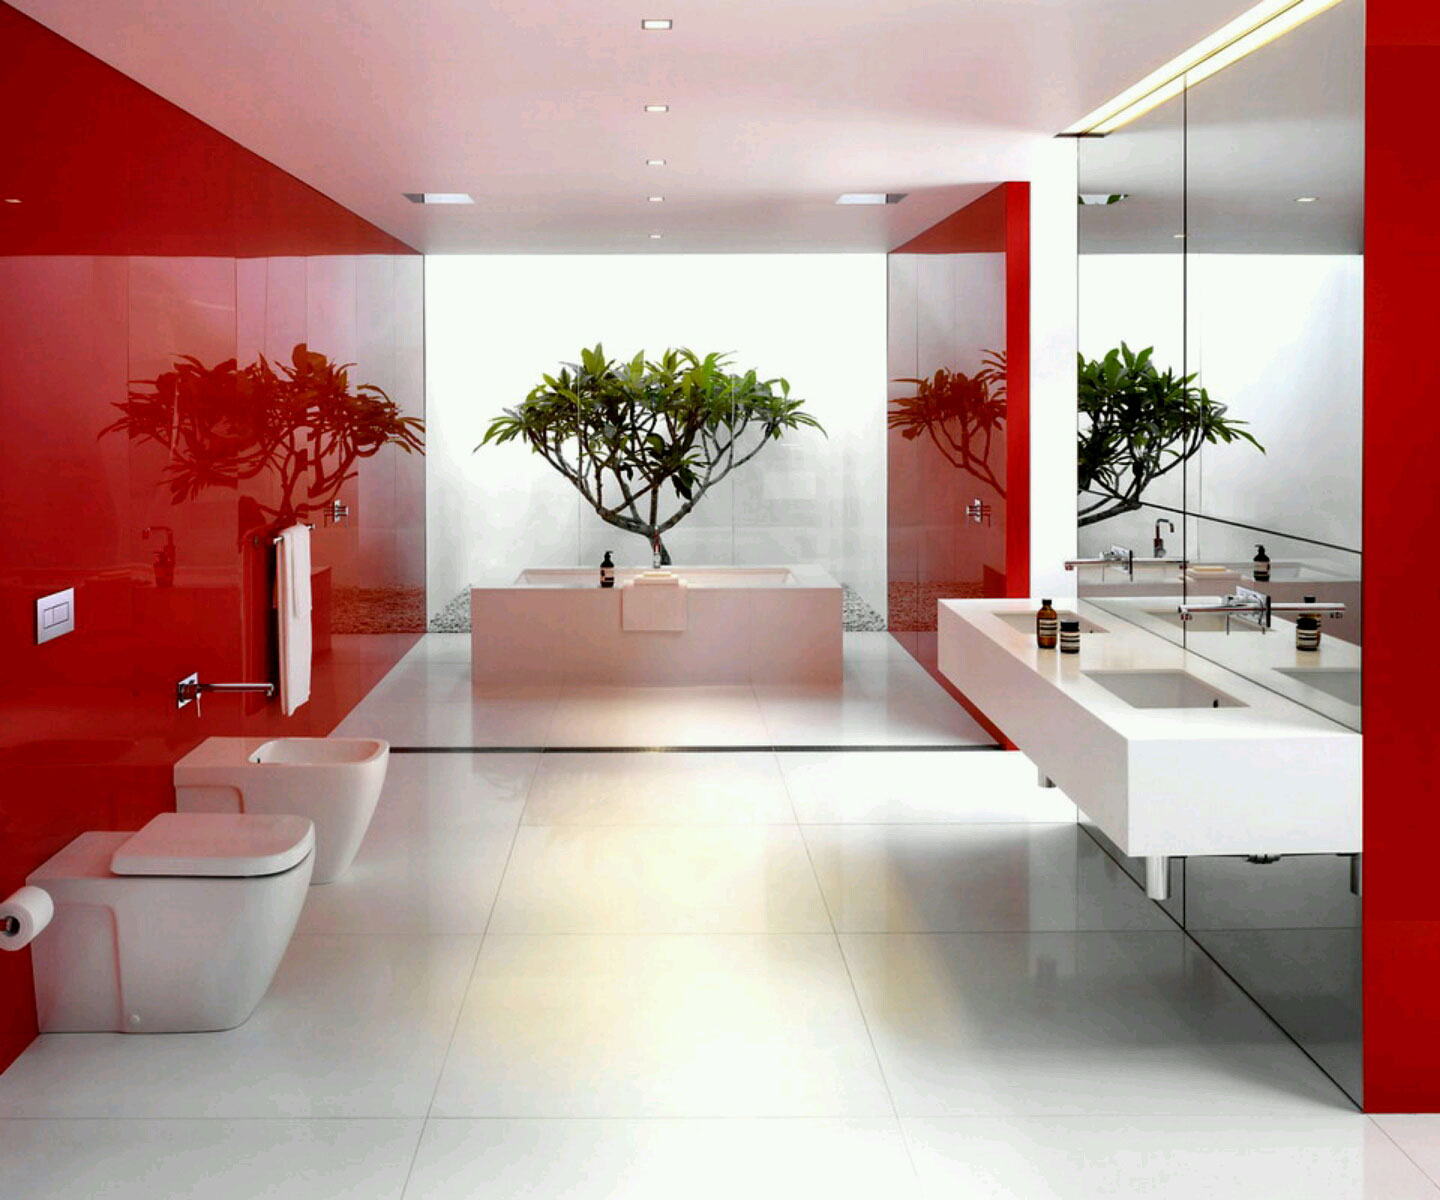 Red Wall With Awesome Red Wall Design Mixed With Splendid White Composite Appliances In Remarkable Modern Bathroom Bathroom Modern Bathroom Interior Designs That Make Elegant And Luxurious Statement